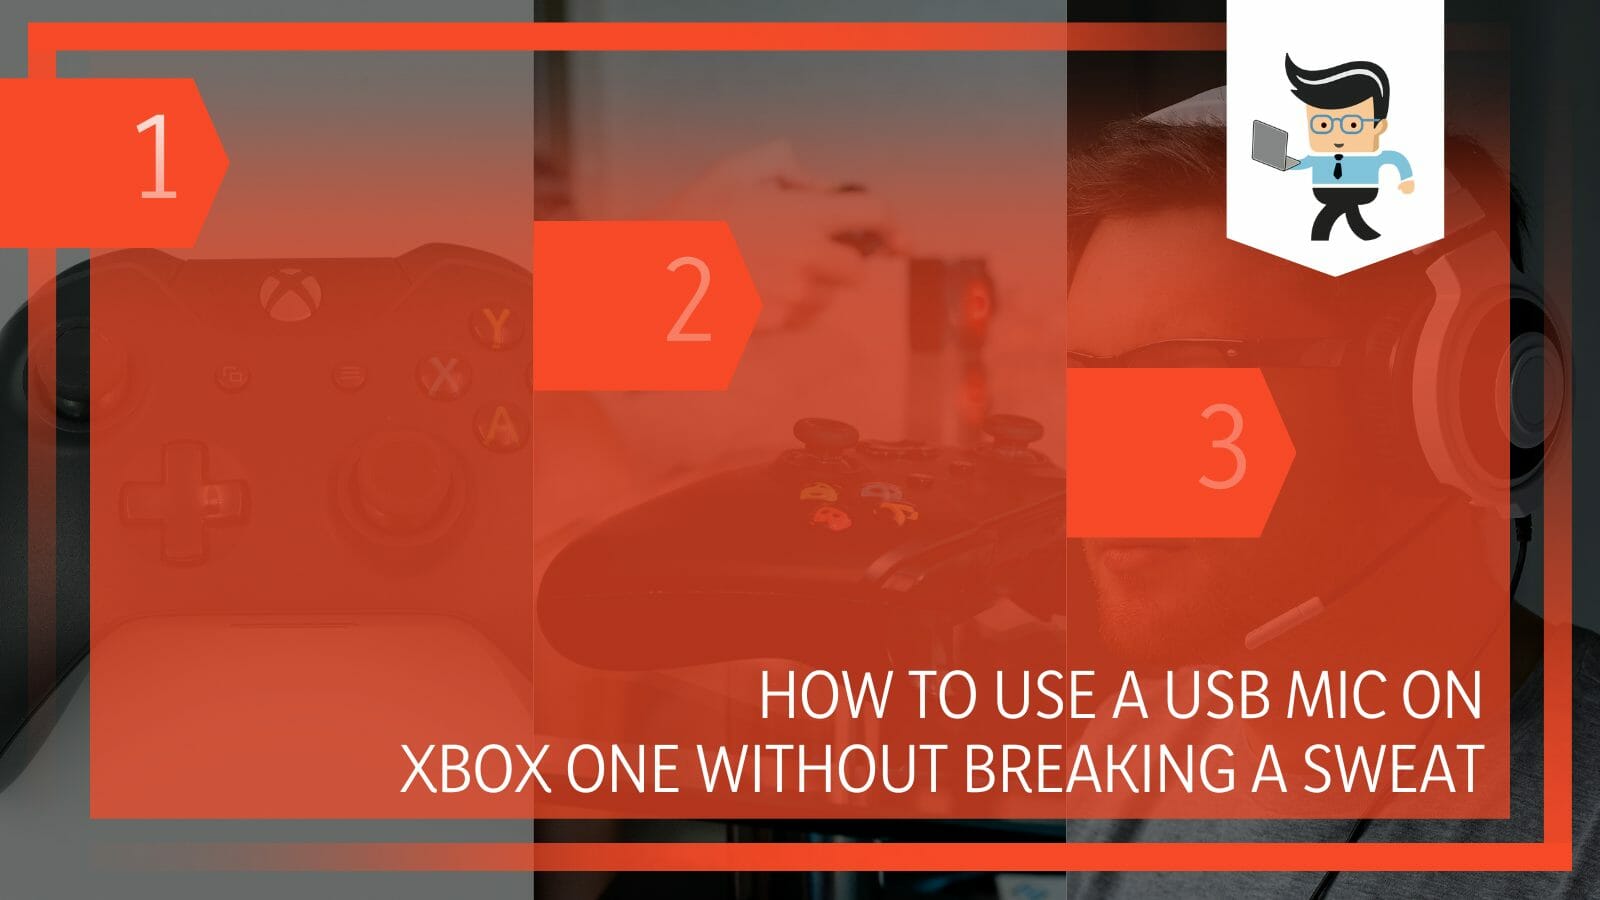 Use a USB Mic on Xbox One Without Breaking a Sweat